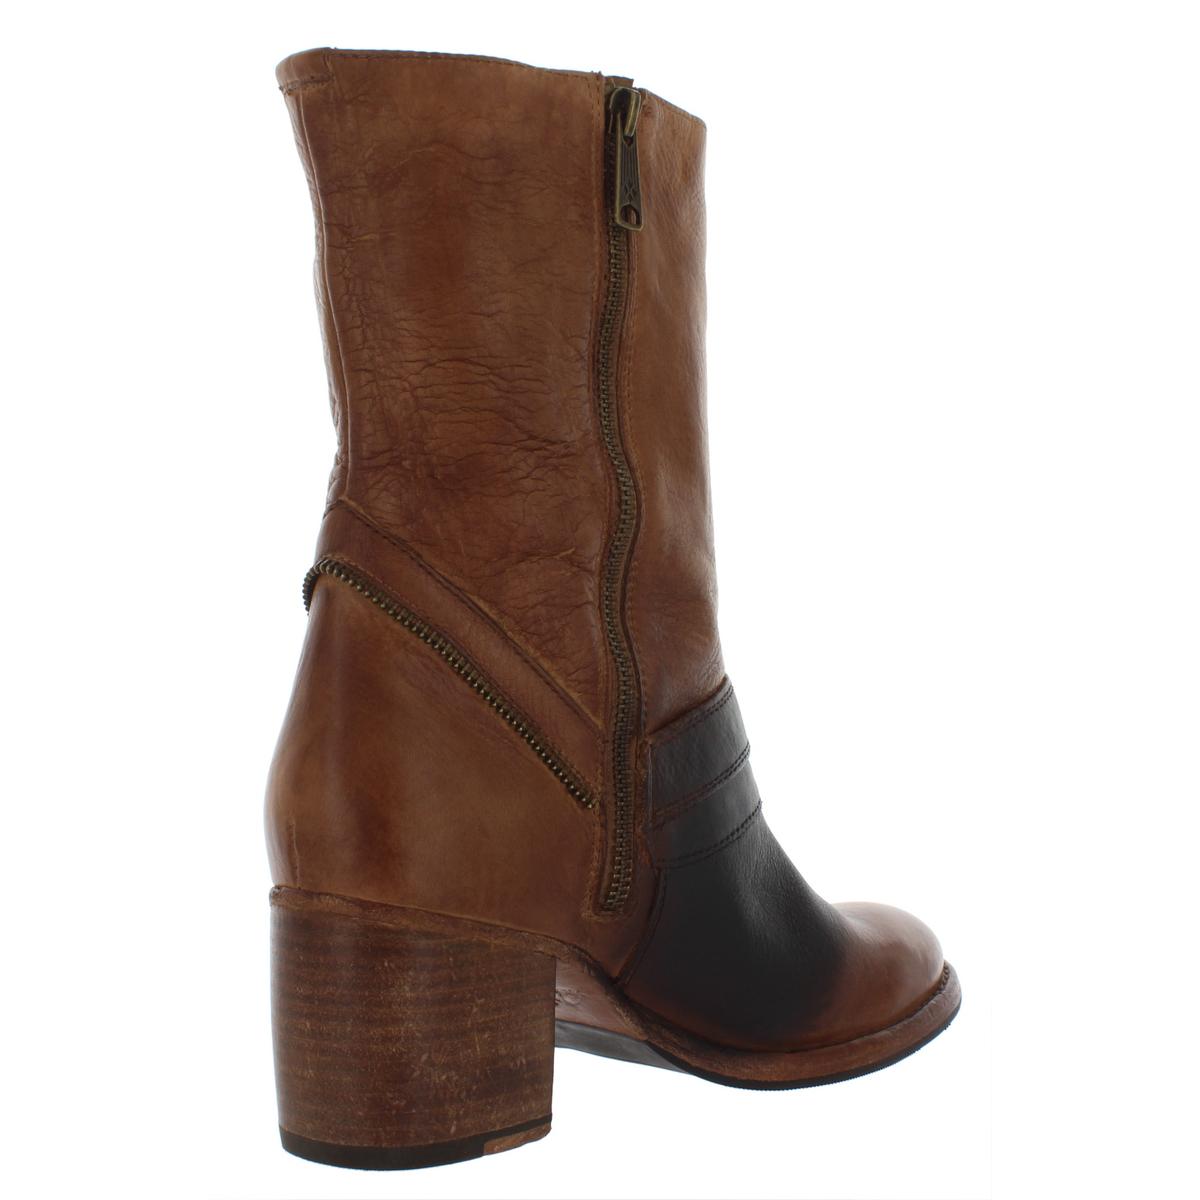 patricia nash boots on sale